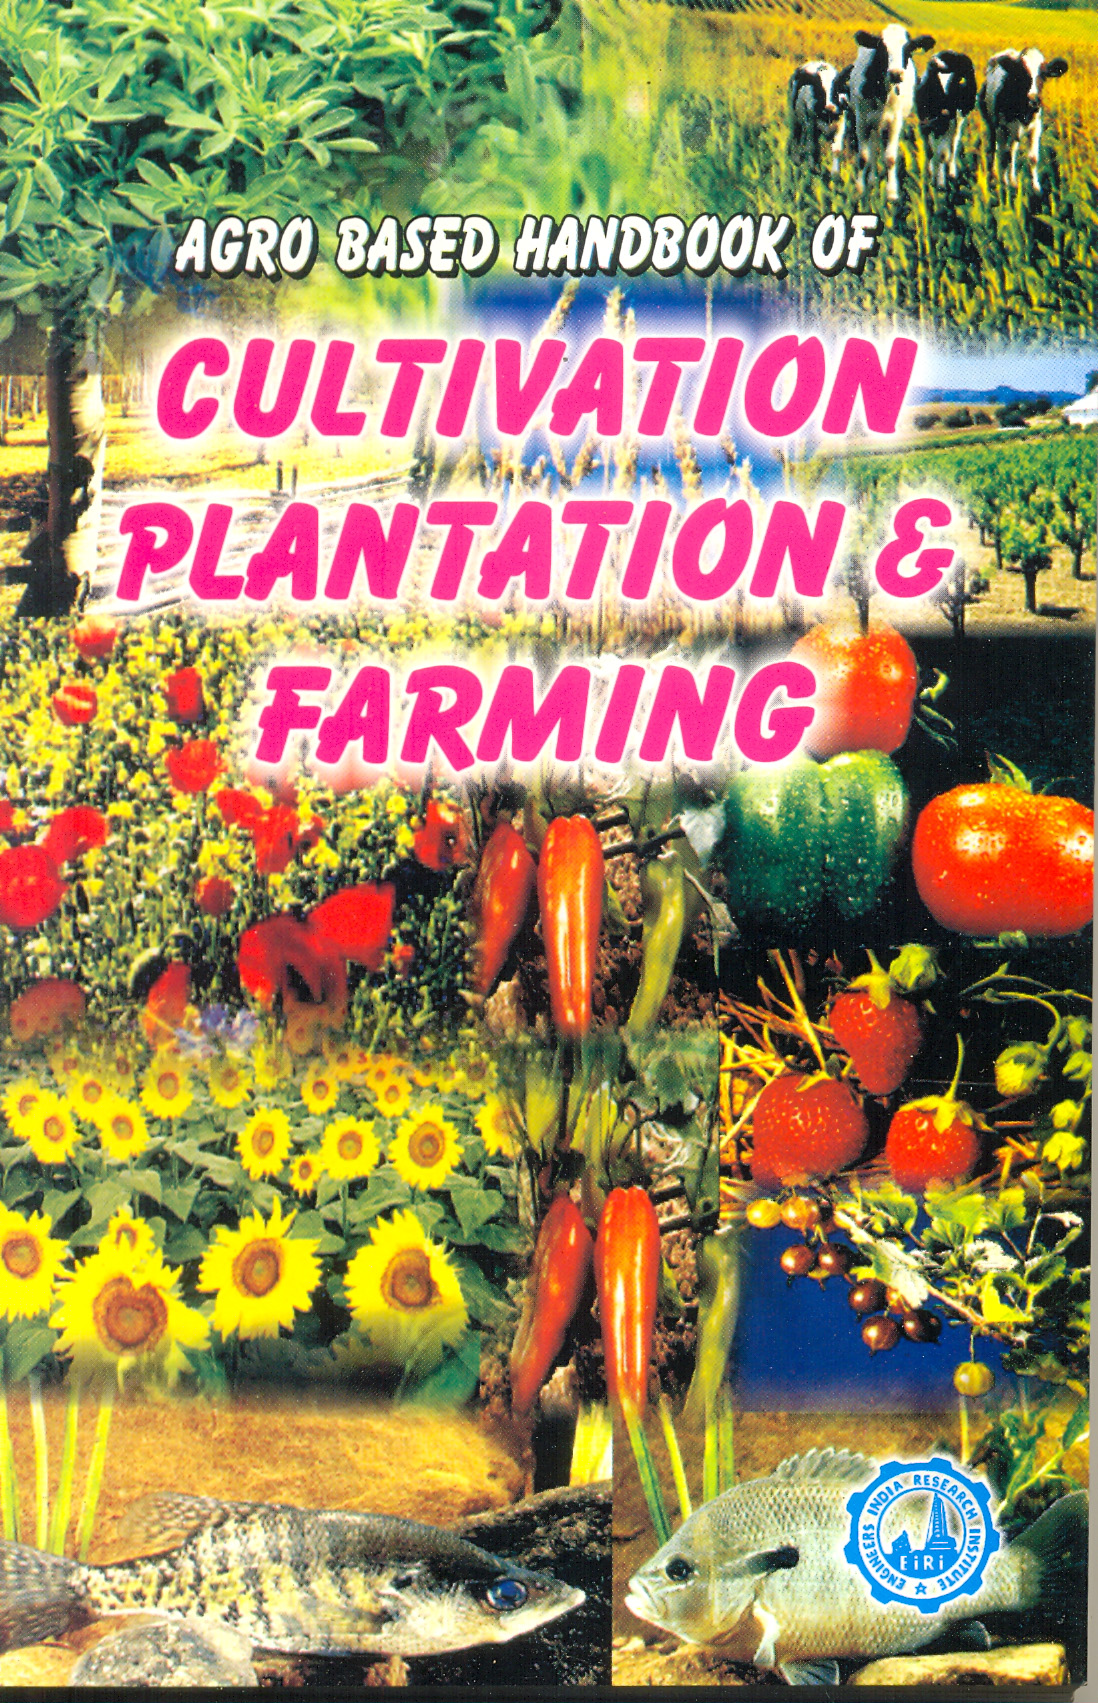 agro based hand book of cultivation, plantation & farming